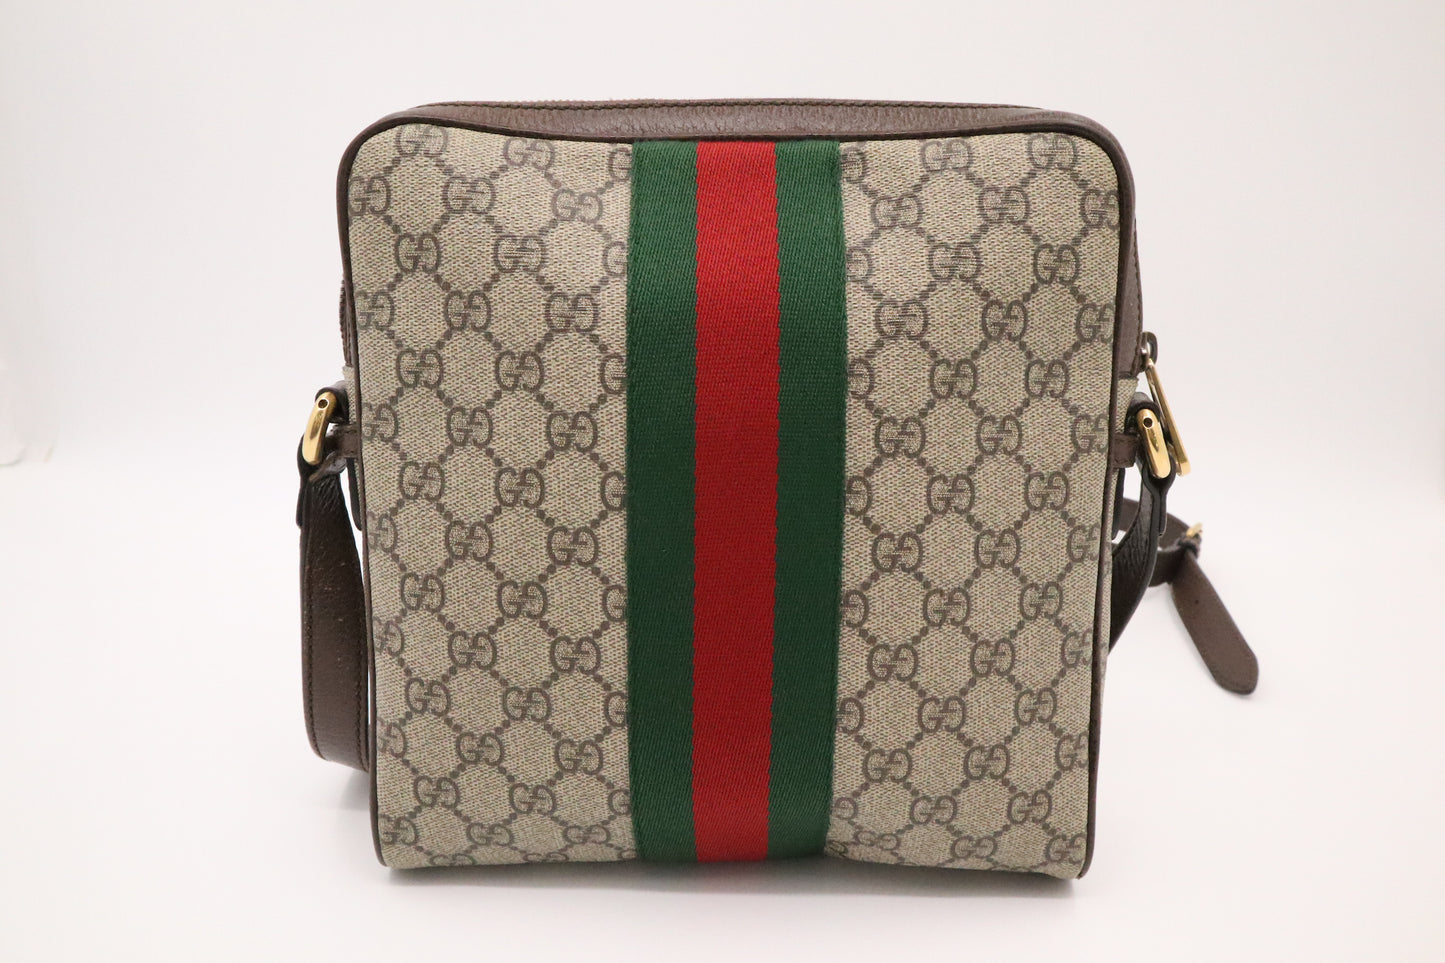 Gucci Ophidia Small Messenger Bag in GG Supreme Canvas